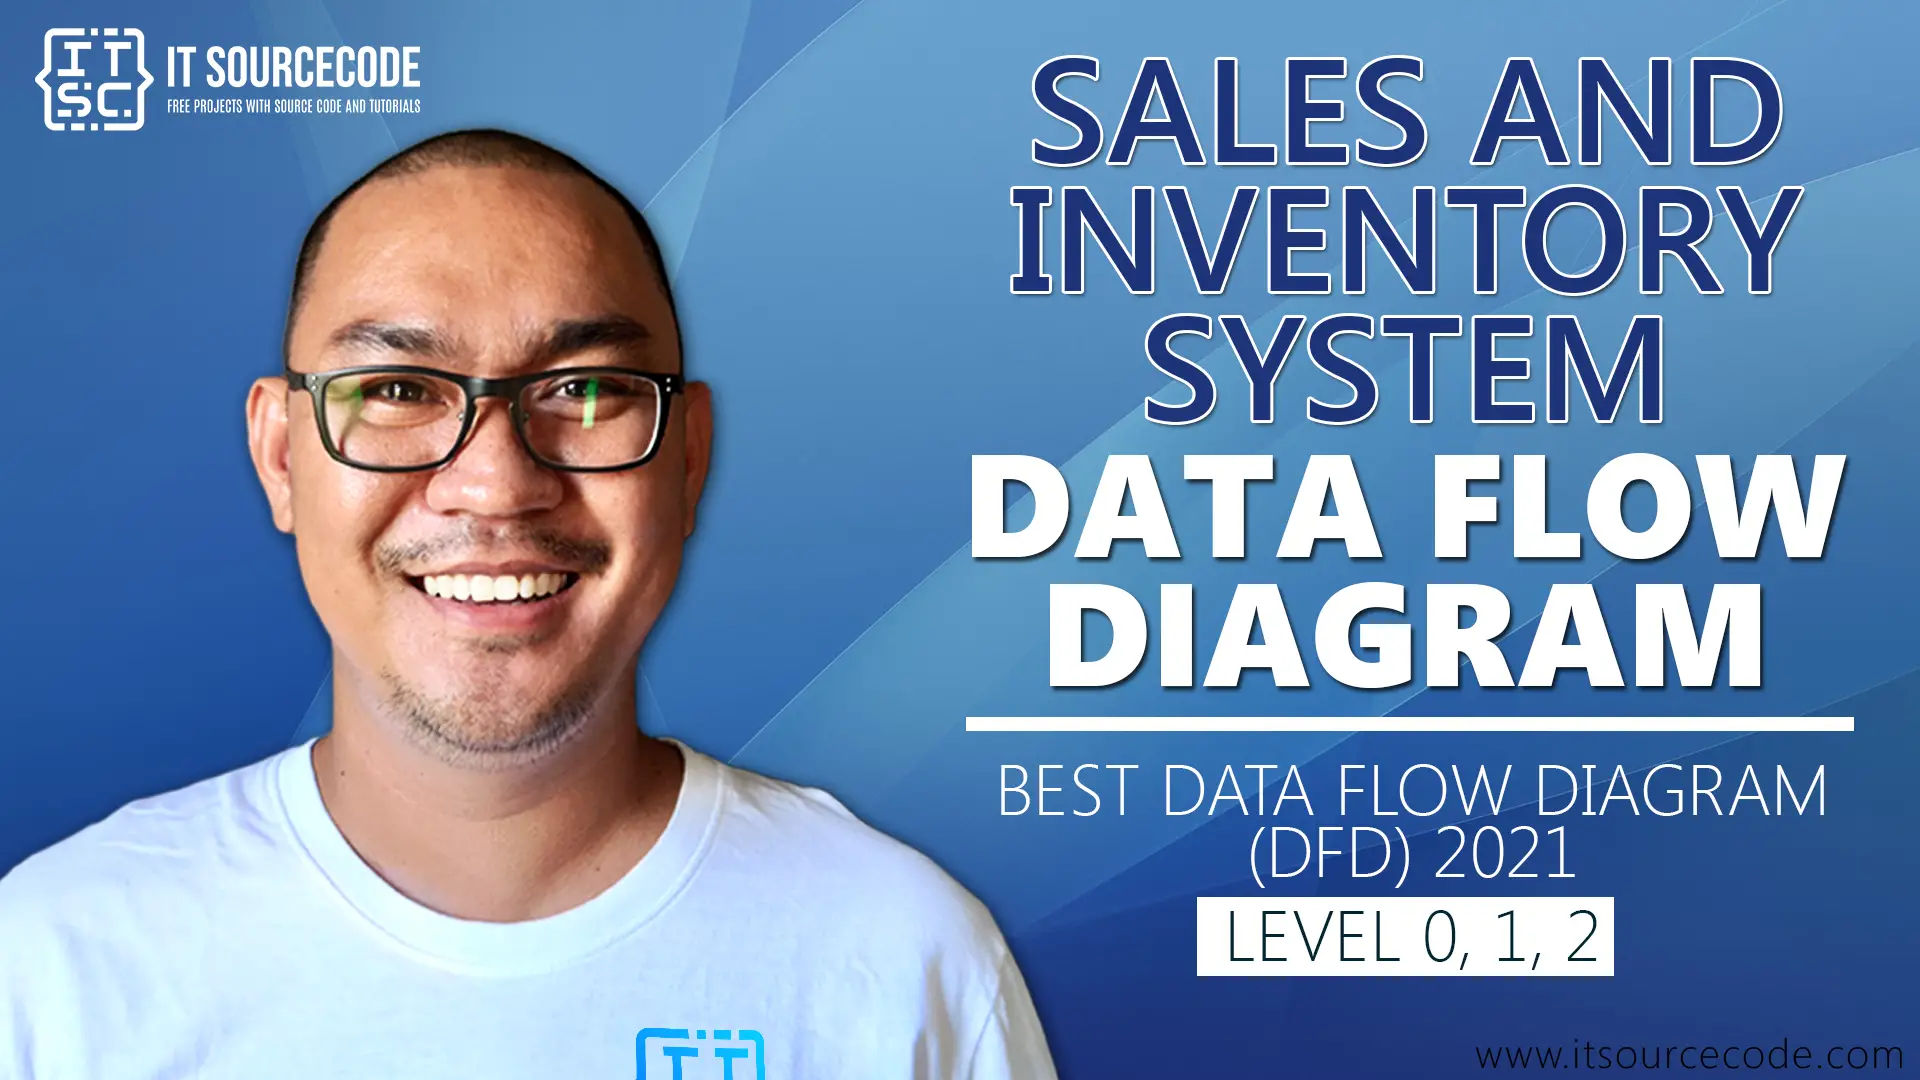 Sales and Inventory System DFD